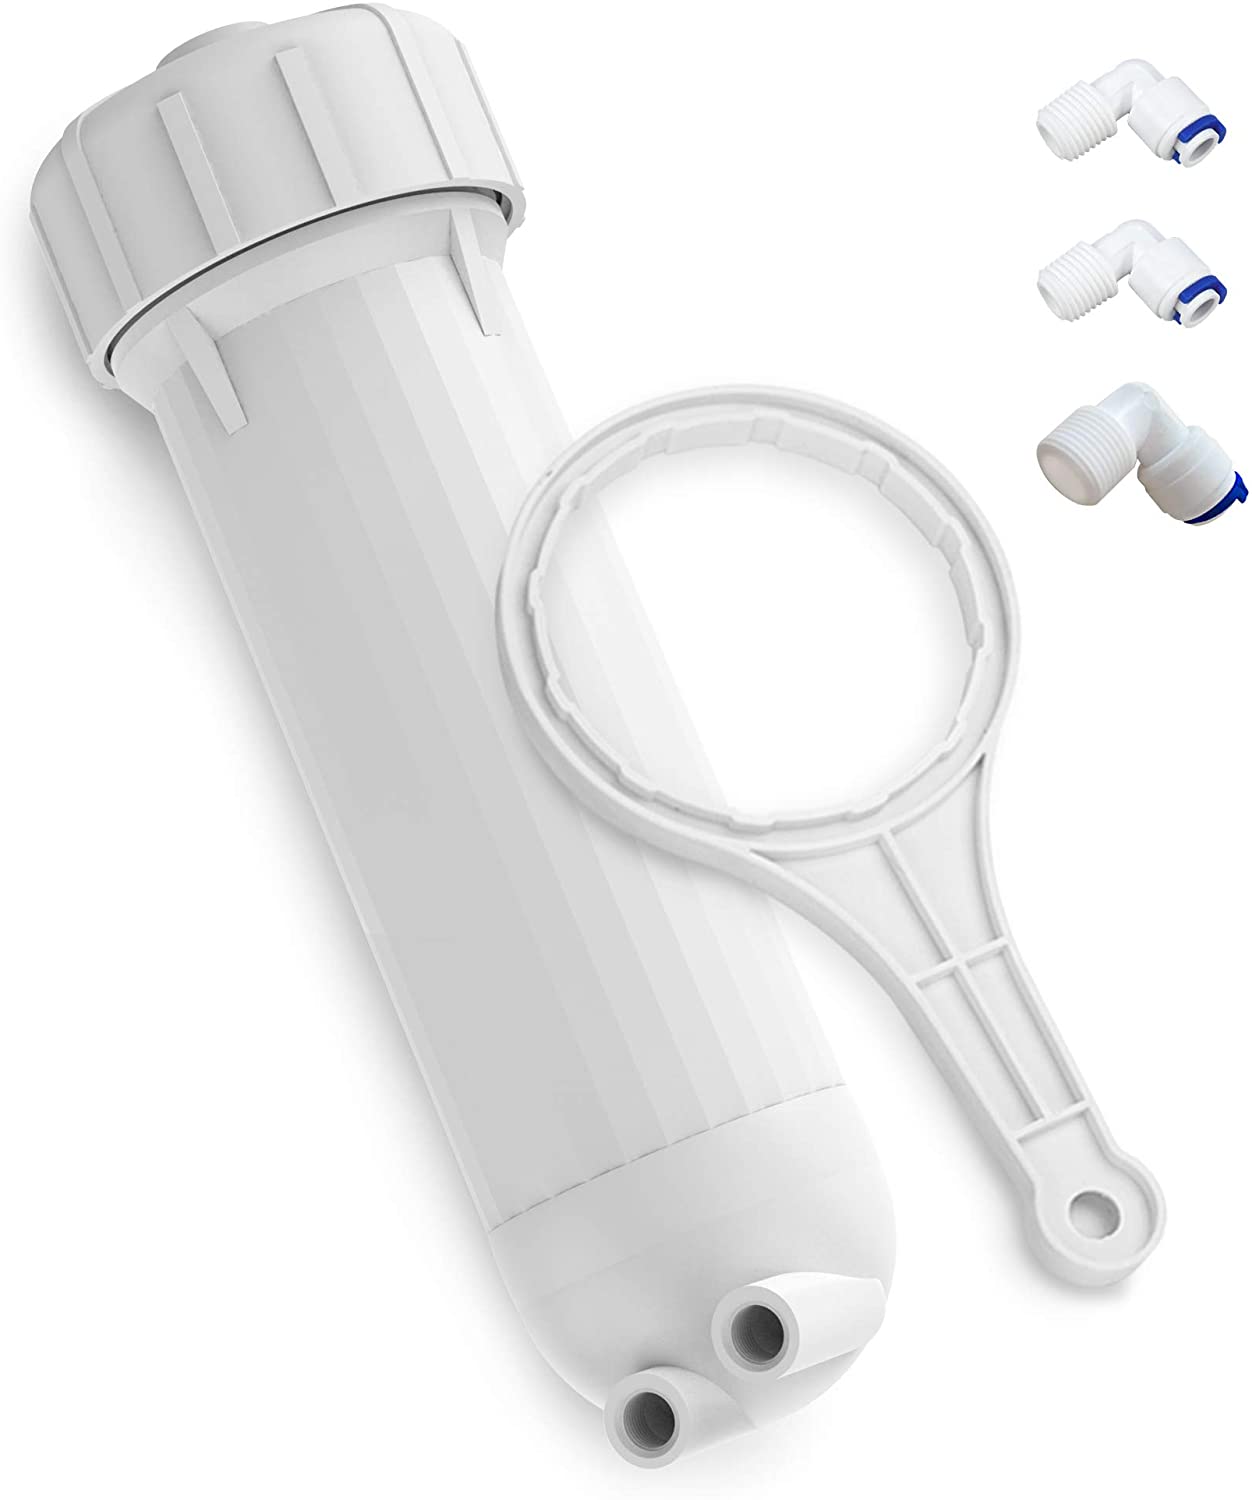 3012 RO Membrane Housing Kit, Universal for Semi Commercial 200/300/400 GPD Reverse Osmosis Water Filter Systems